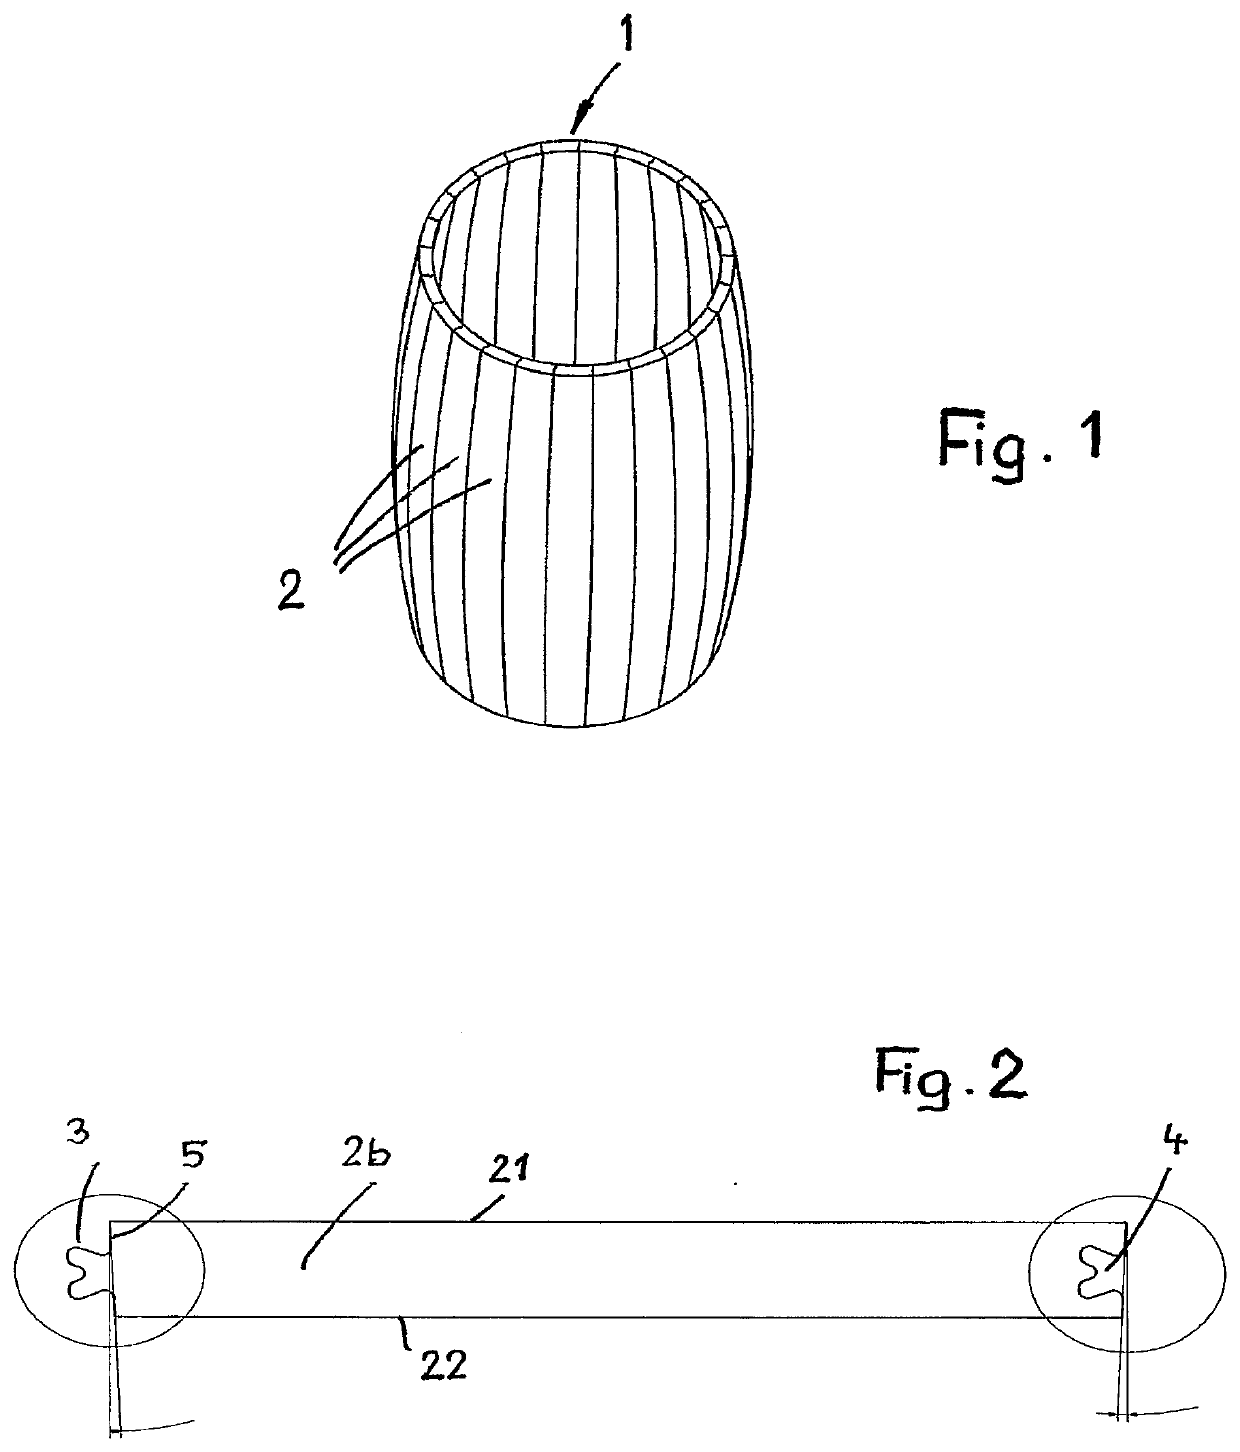 Stave, Wooden Barrel with Staves, and Method for Producing Staves